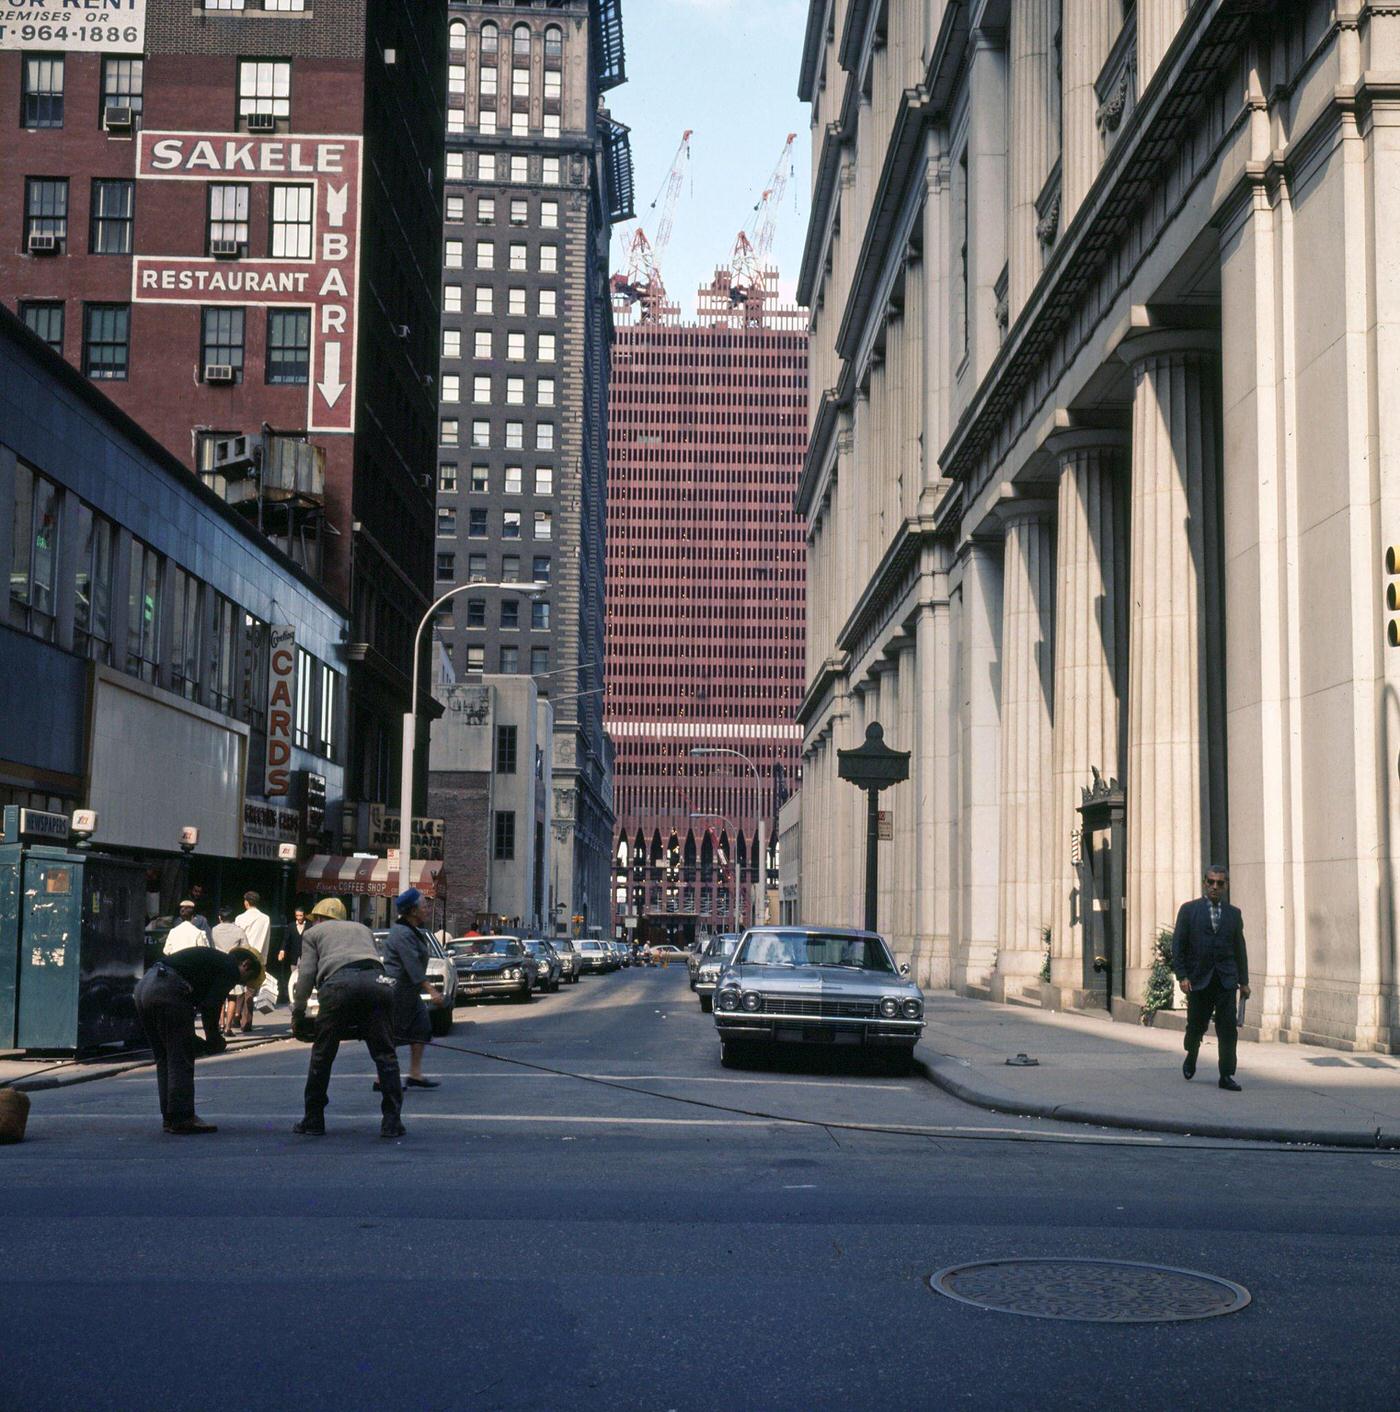 Construction Of North Tower Of The Original World Trade Center, 1969